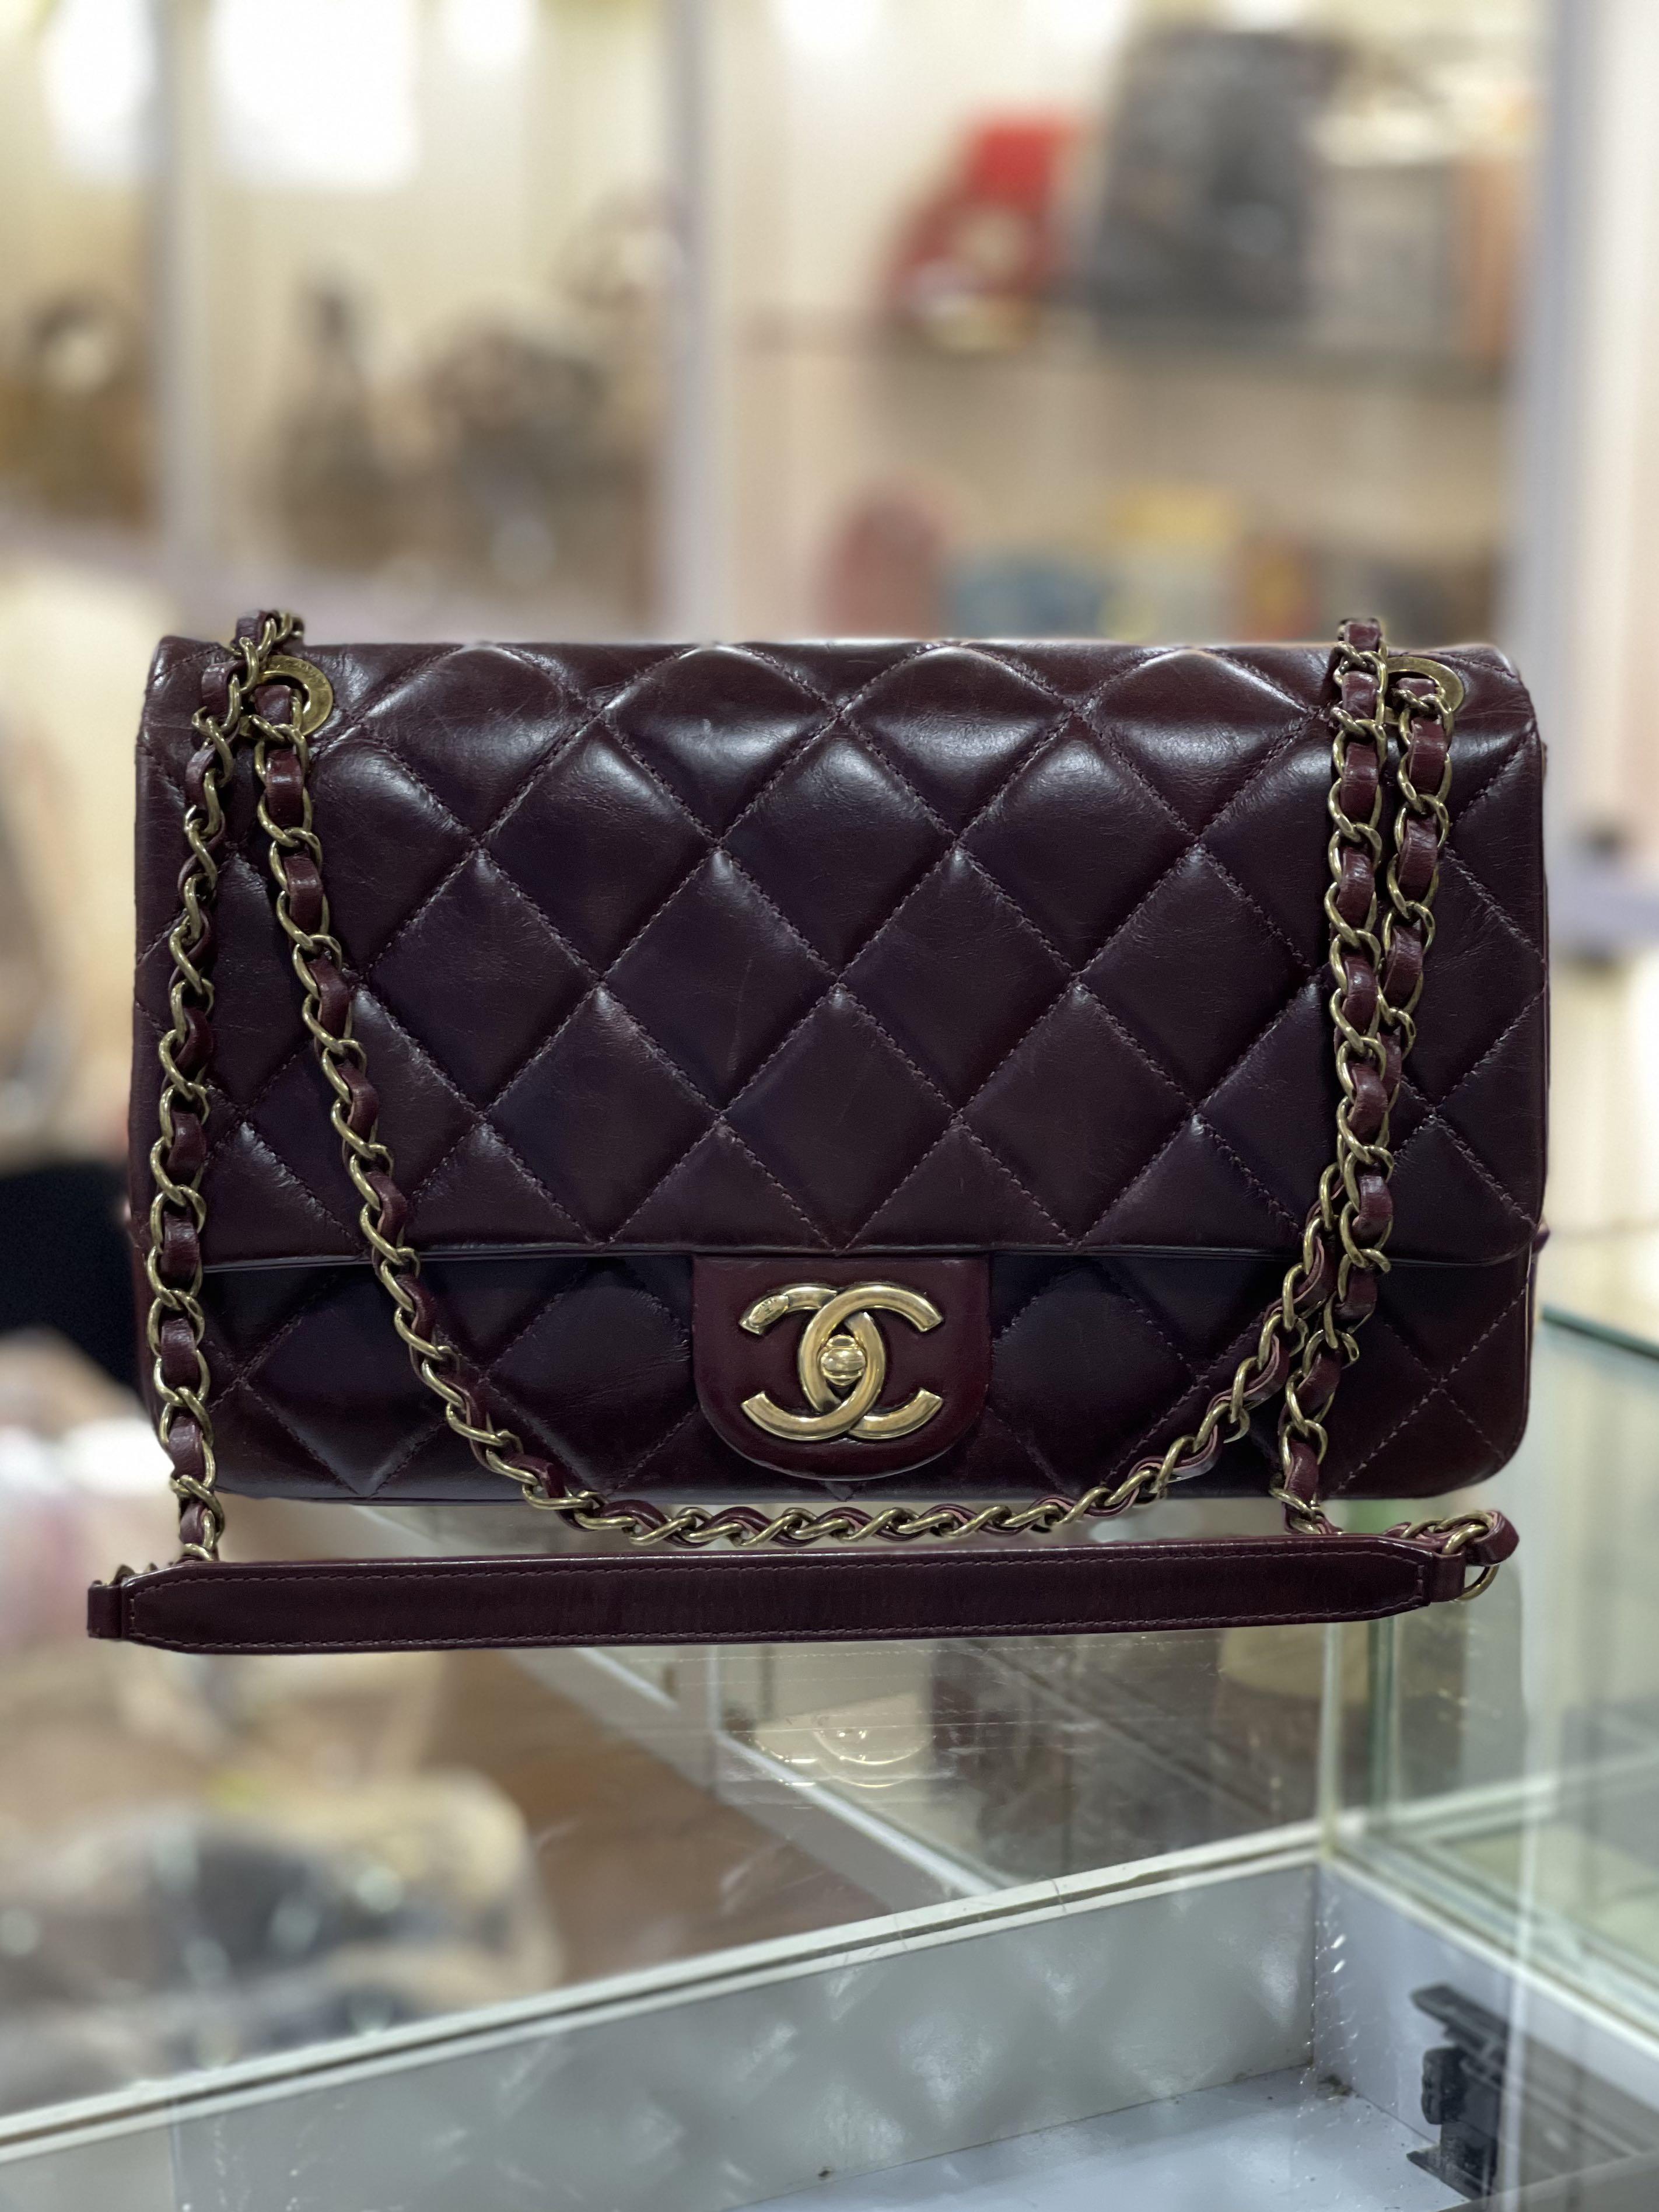 FINDS Chanel Flap Bag Paris Salzburg Haute Couture Collection   RealhouseKeepers